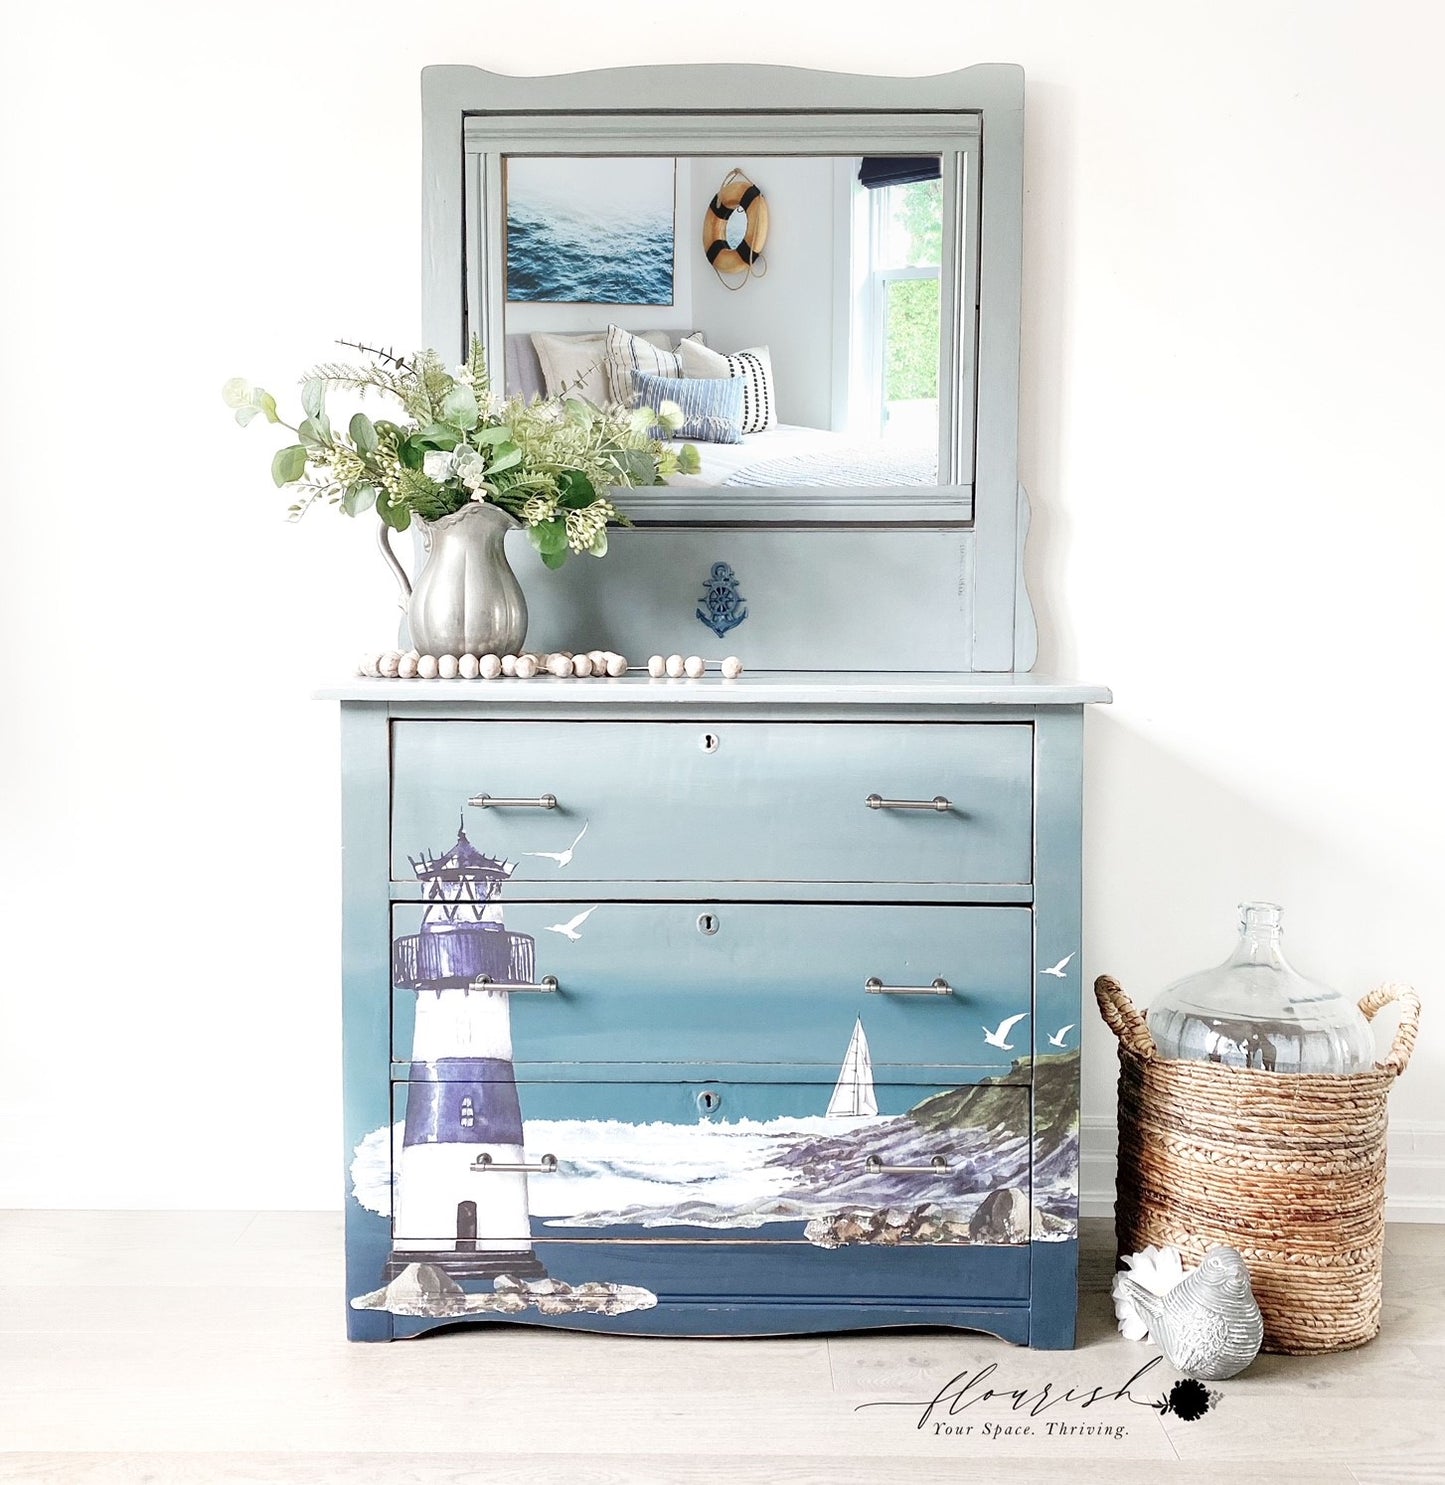 Lighthouse transfer Redesign with Prima - Same Day Shipping - Rub on Decal - Coastal Decor - Decor Transfer